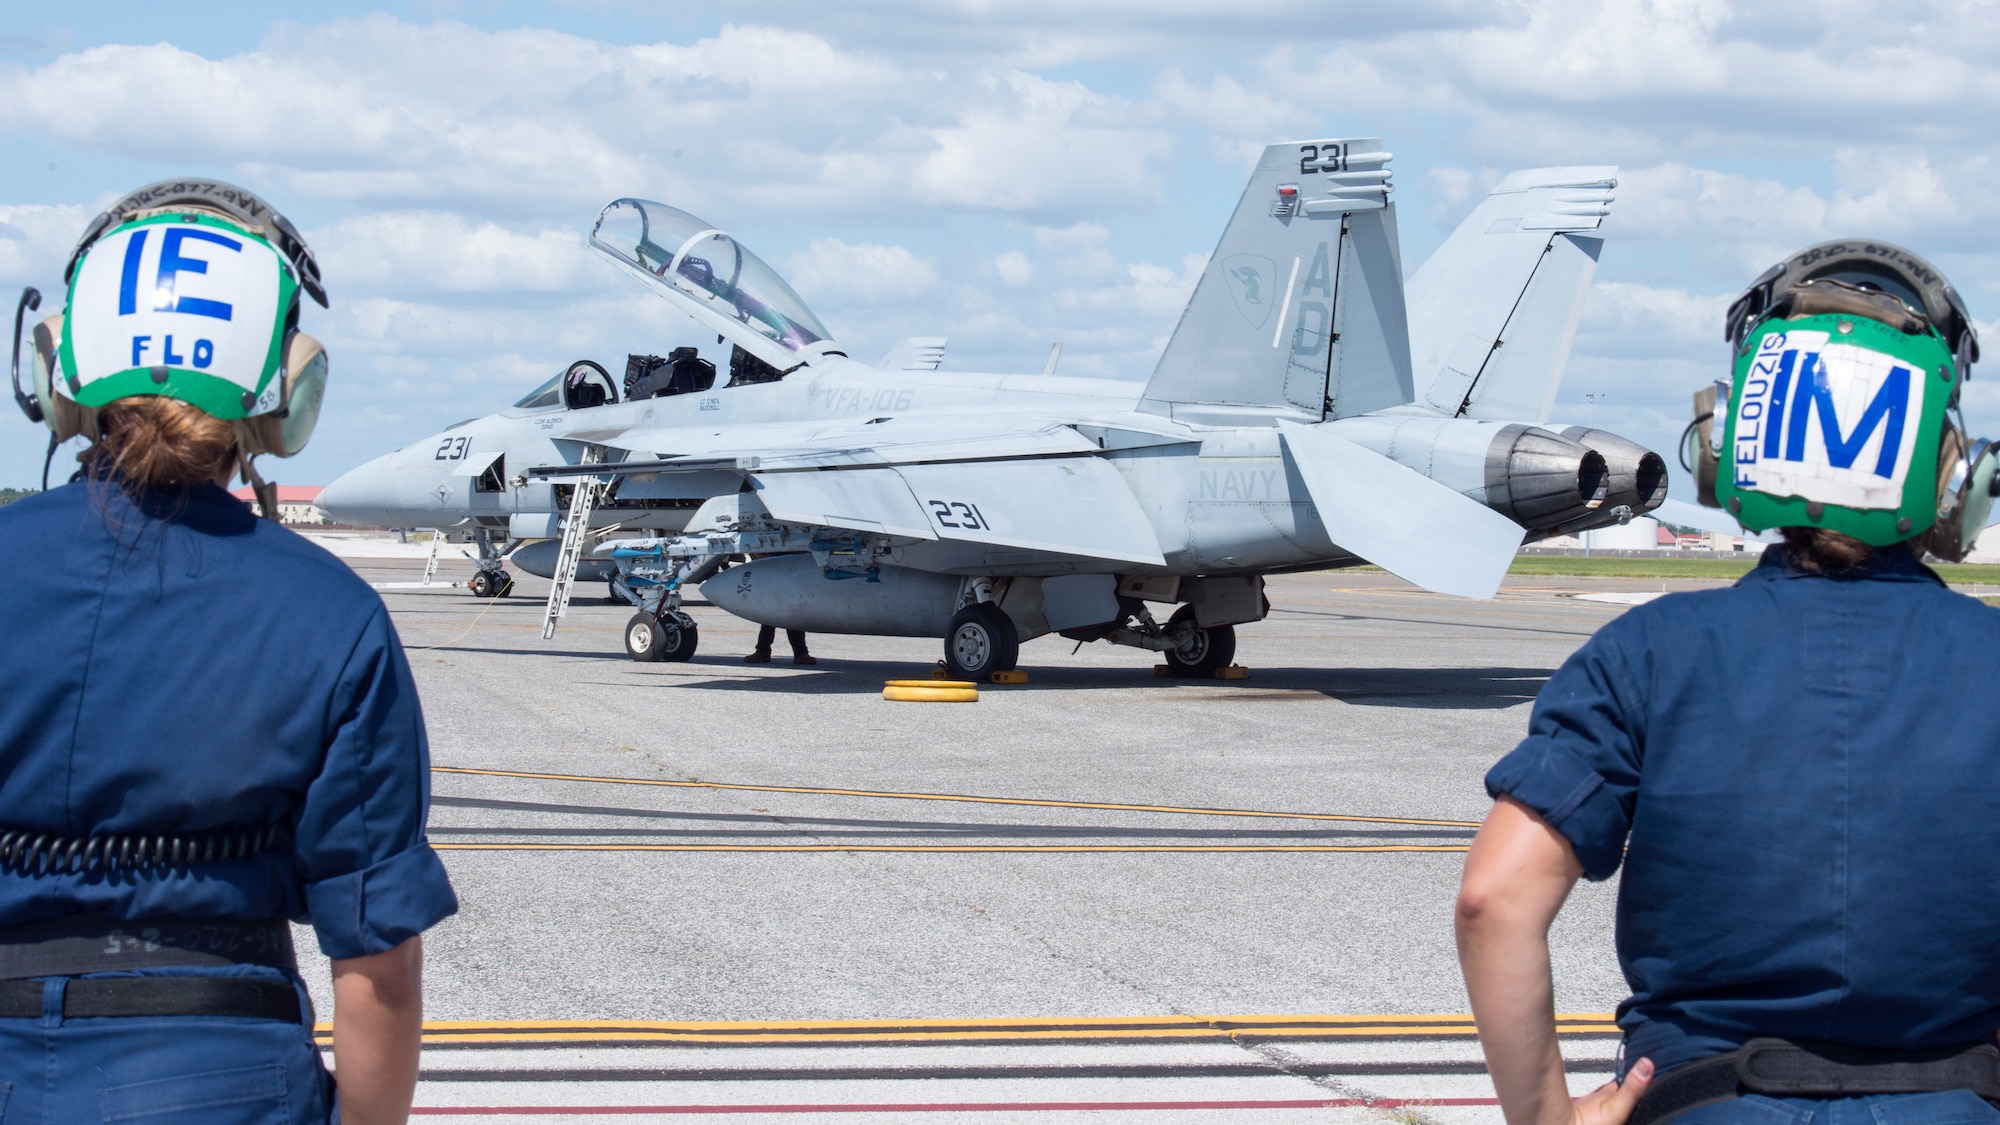 Petty Officer 2nd Class Michelle Flores, a Strike Fighter Squadron (VFA) 106 aviation electrician, and Petty Officer 2nd Class Erika Felouzis, a VFA-106 aviation mechanic from Naval Air Station Oceania, Va., monitor the flight line at MacDill Air Force Base, Fla., Oct. 3, 2019.